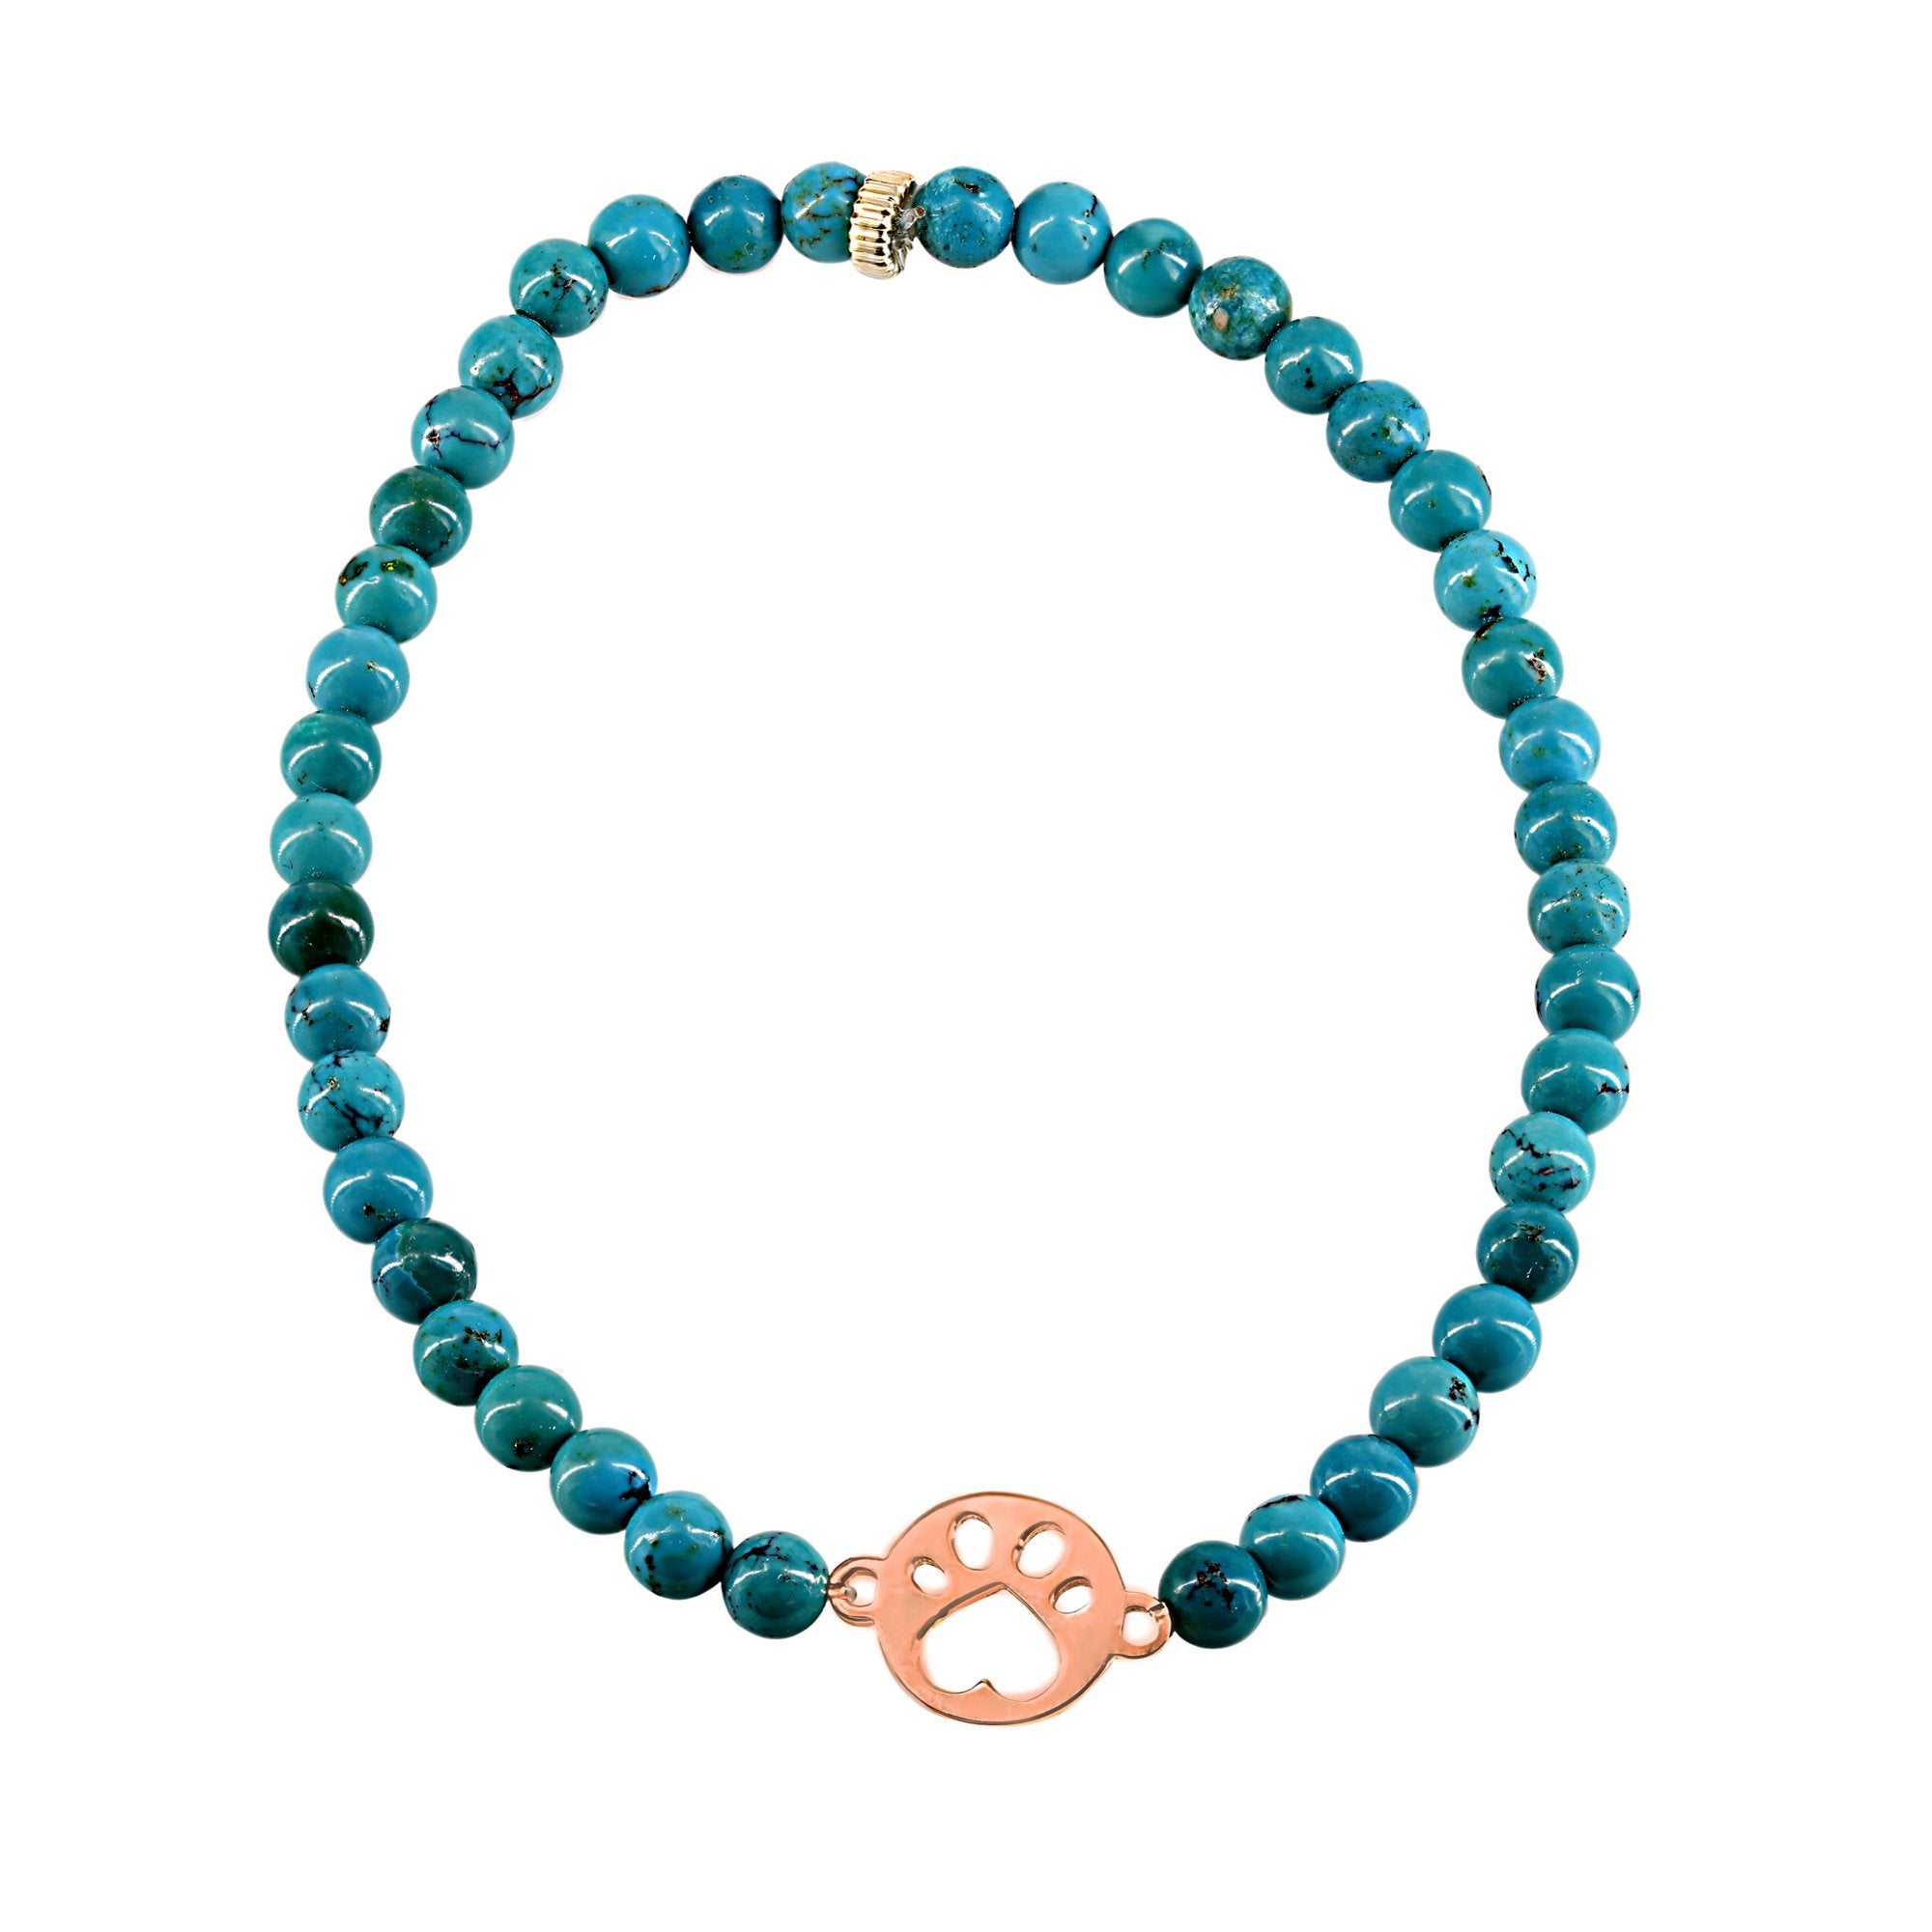 Our Cause for Paws 14k Rose Gold Mini Paw Bead Bracelet